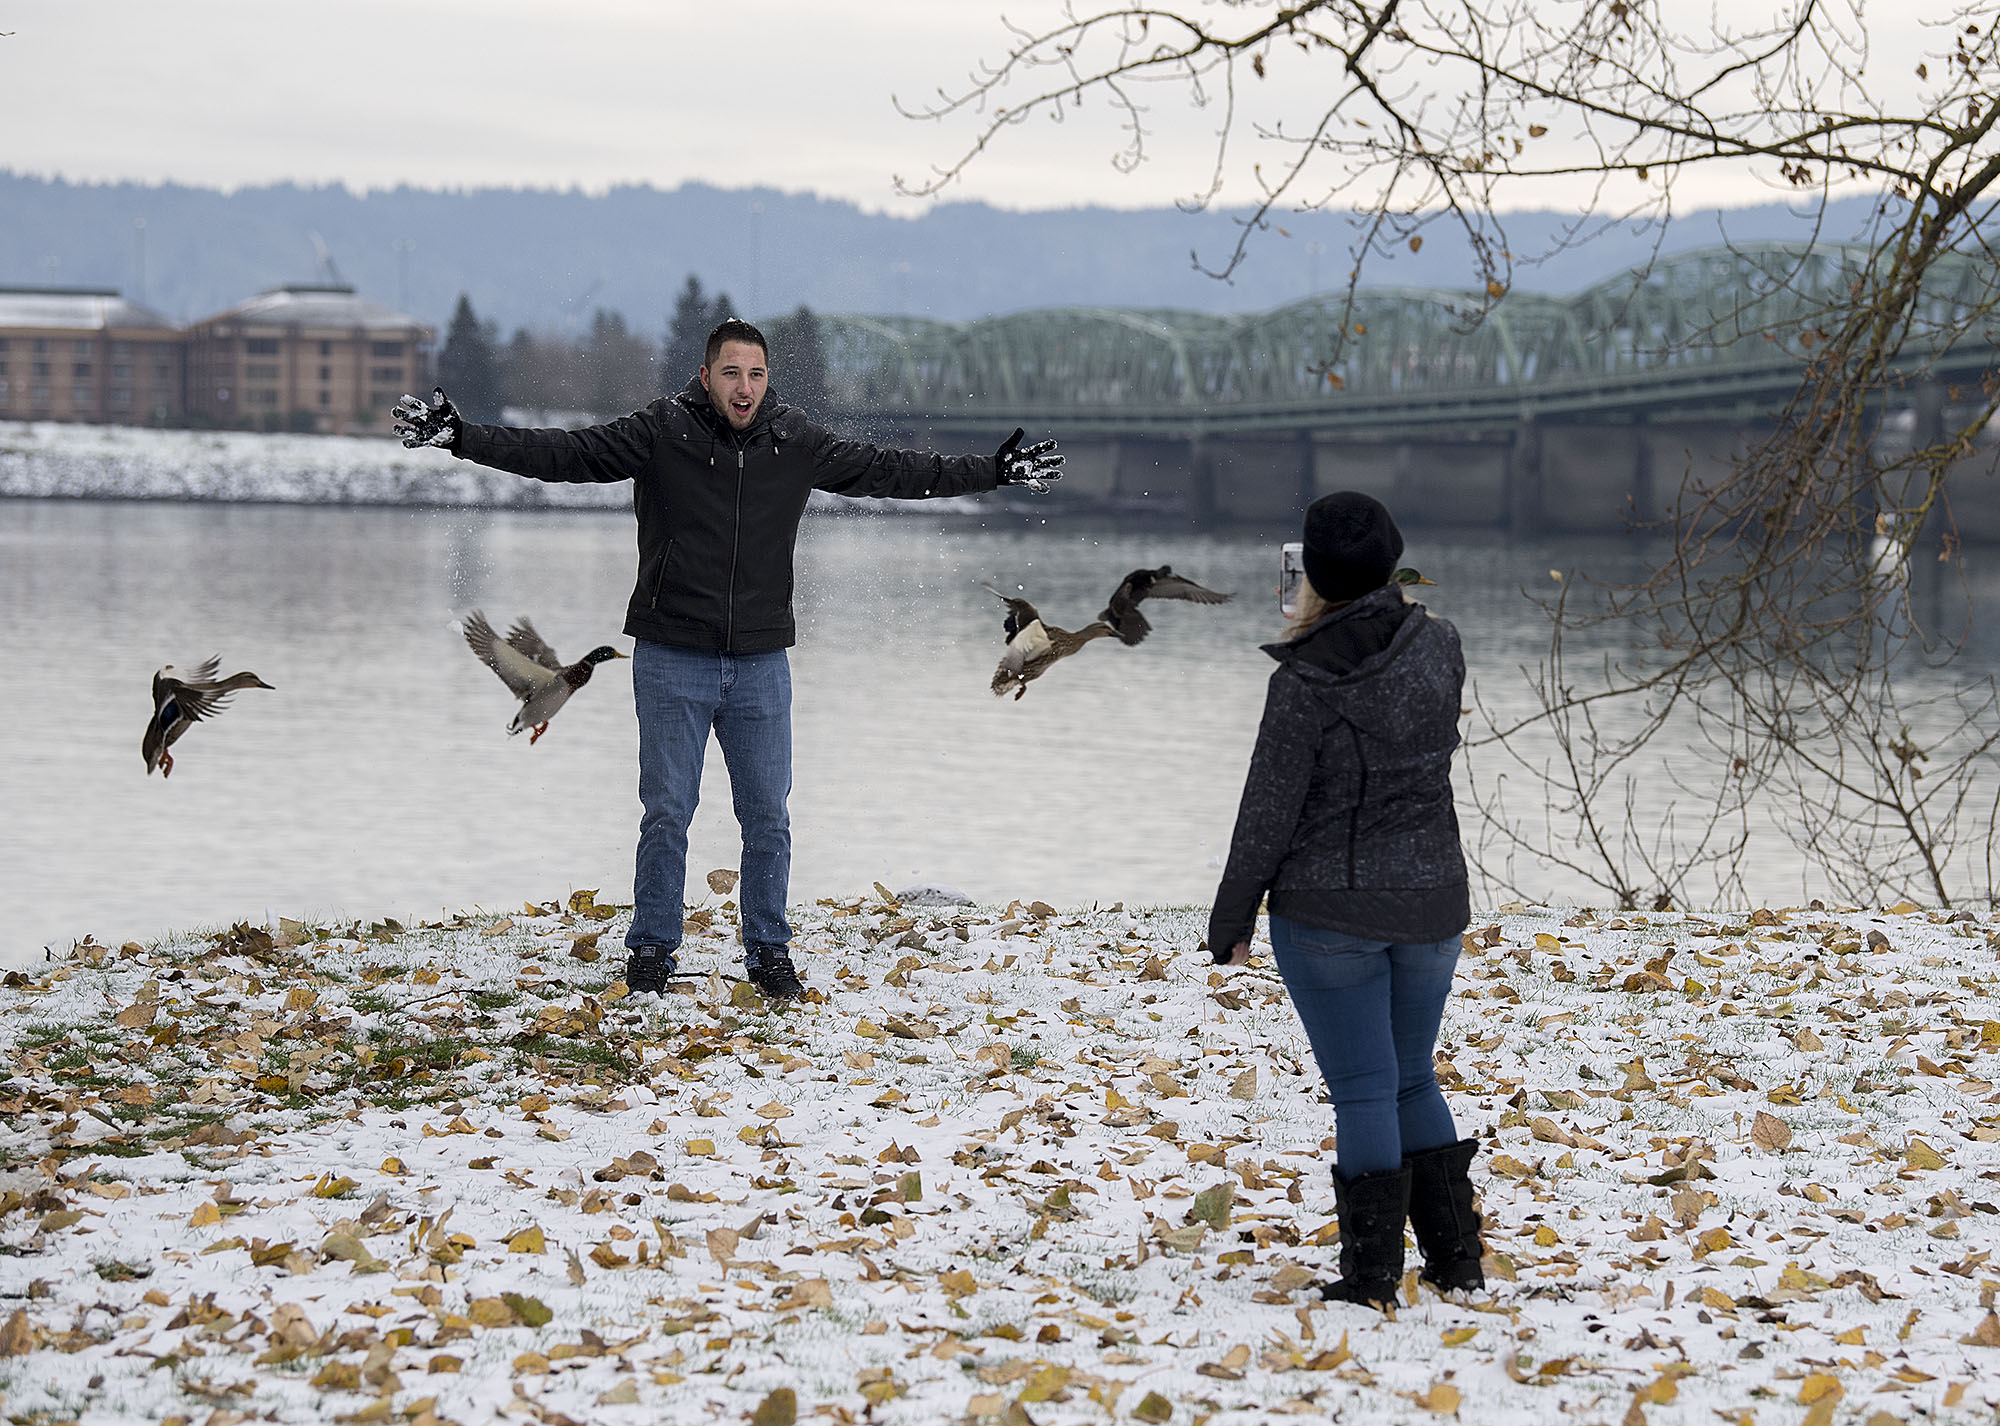 Zach Perez of Arizona, left, enjoys the winter weather as his girlfriend, Makayla Rehanek, snaps his photo while getting a surprise visit from a group of new feathered friends at the Vancouver Waterfront on Thursday afternoon, Dec. 15, 2016. The couple was in the Northwest housesitting and visiting family for the holidays.